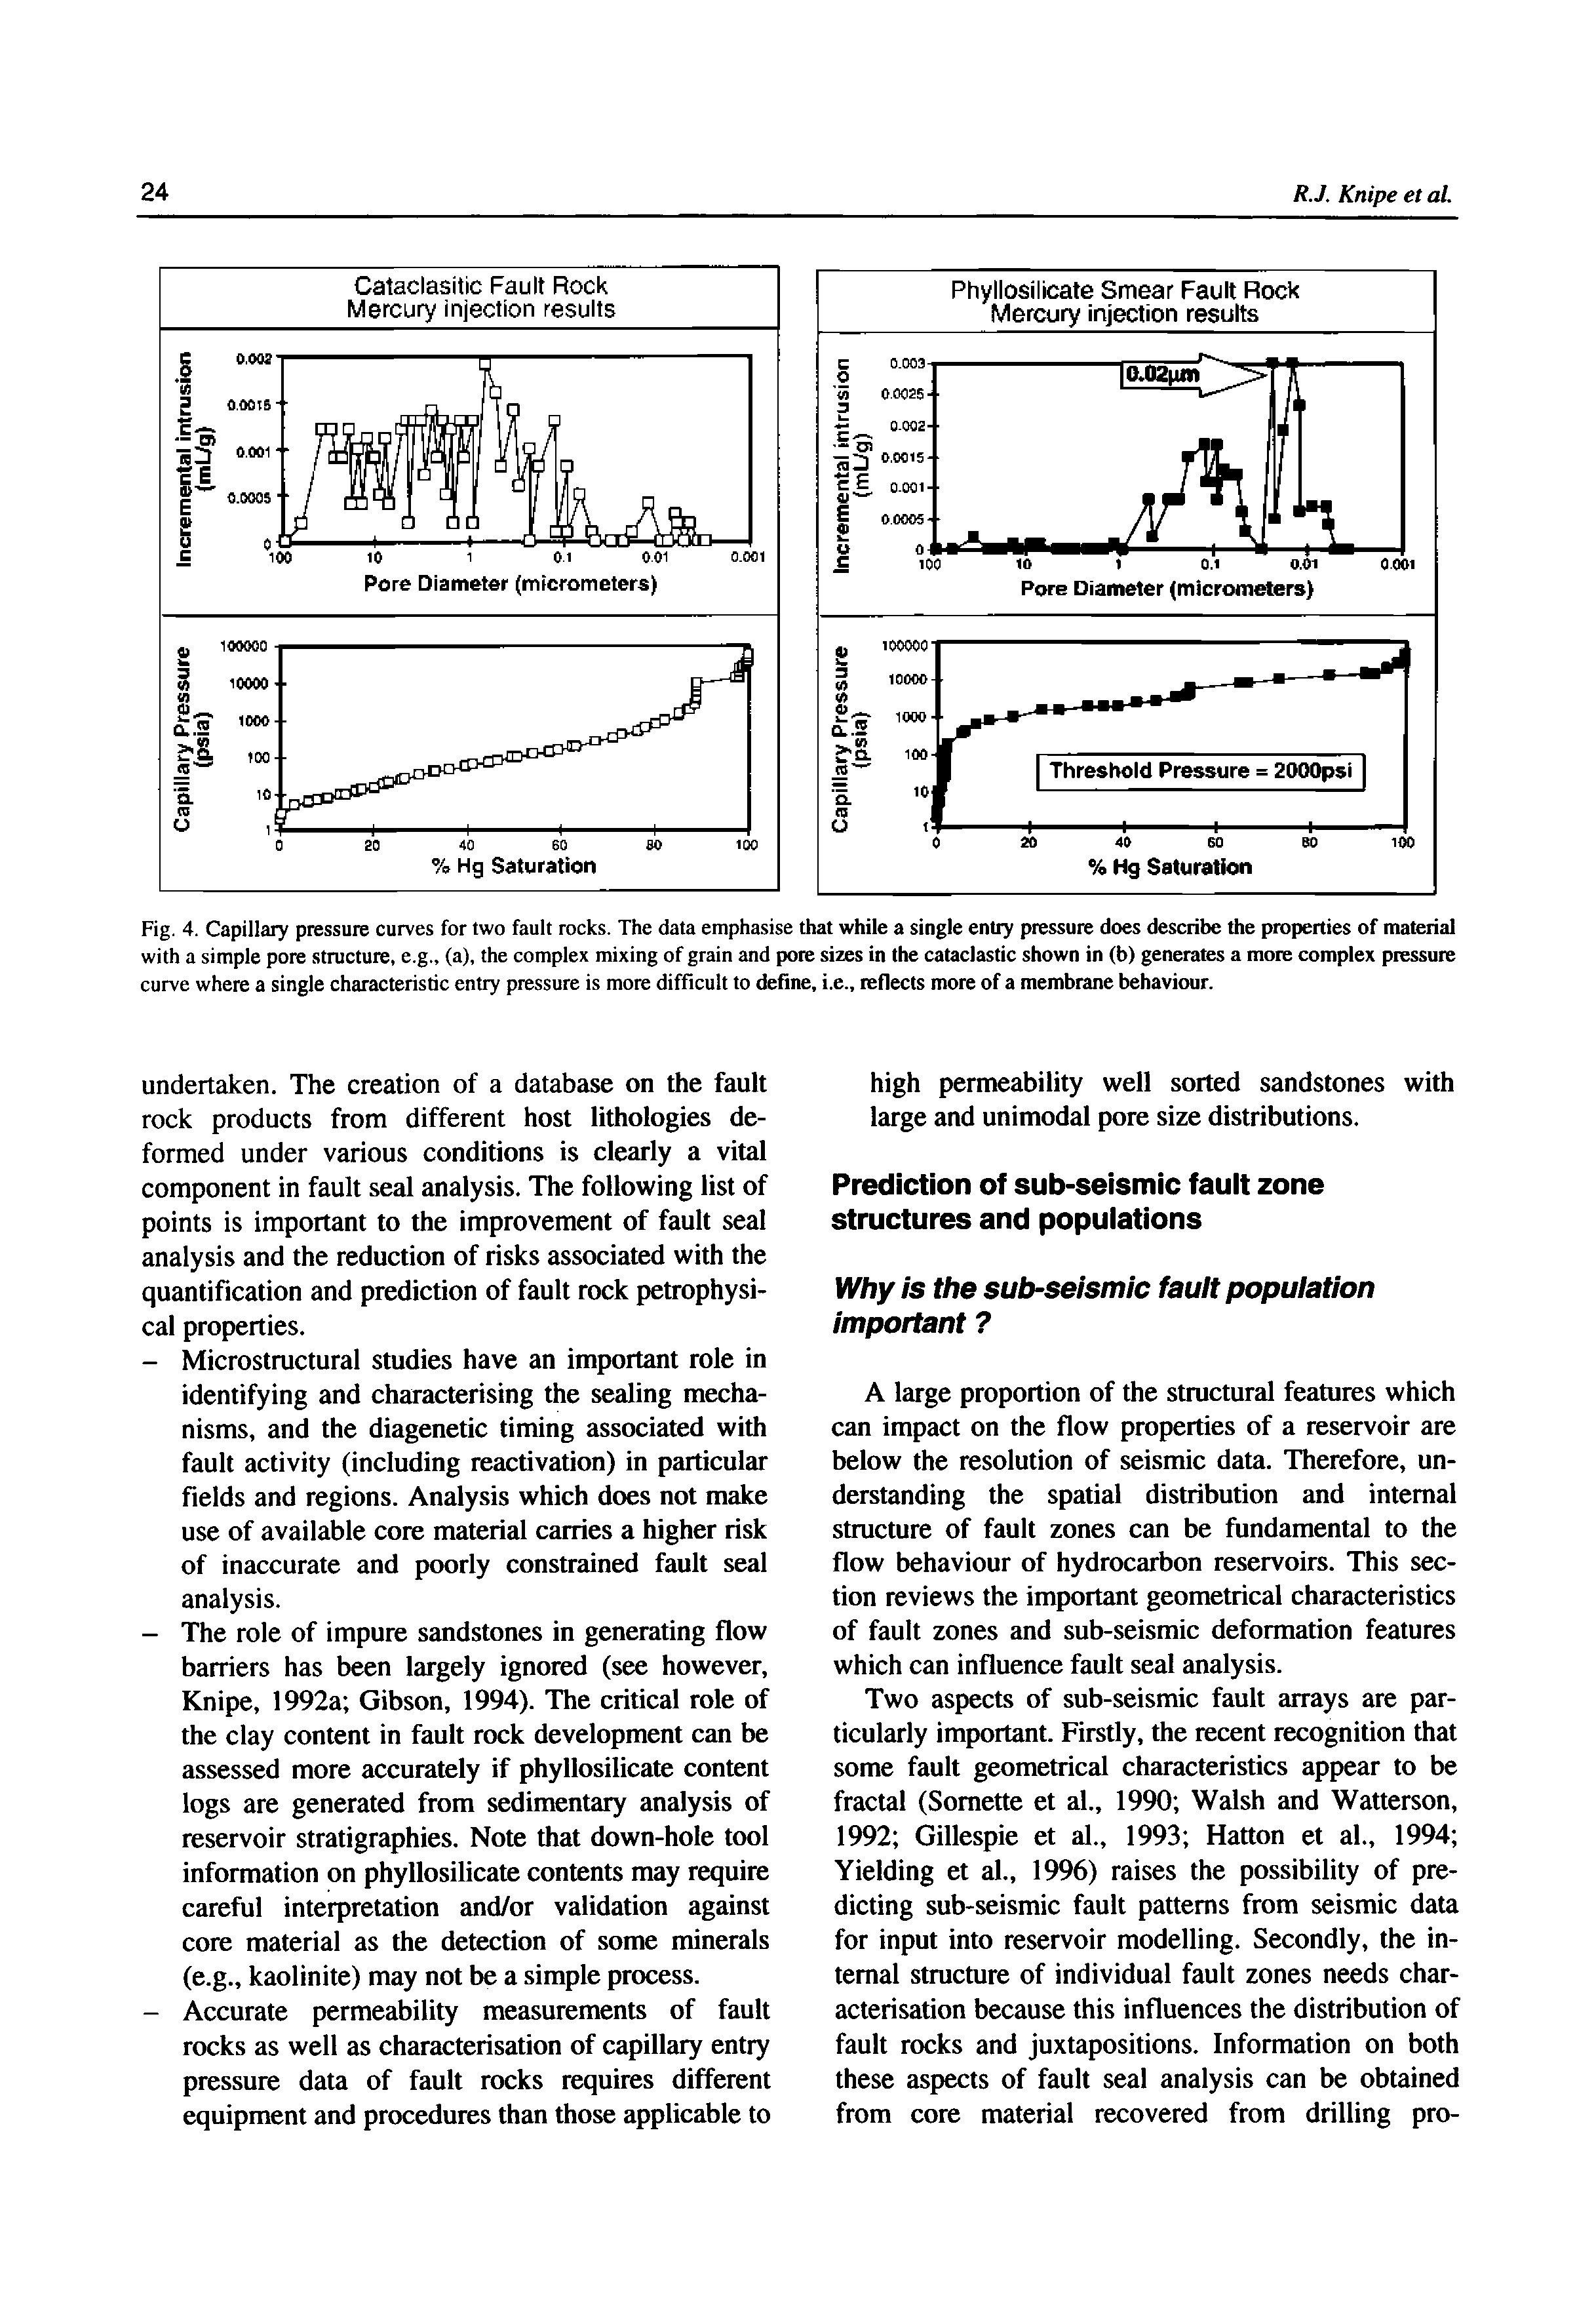 Fig. 4. Capillary pressure curves for two fault rocks. The data emphasise that while a single entry pressure does describe the properties of material with a simple pore structure, e.g., (a), the complex mixing of grain and pore sizes in the cataclastic shown in (b) generates a more complex pressure curve where a single characteristic entry pressure is more difficult to define, i.e., reflects more of a membrane behaviour.